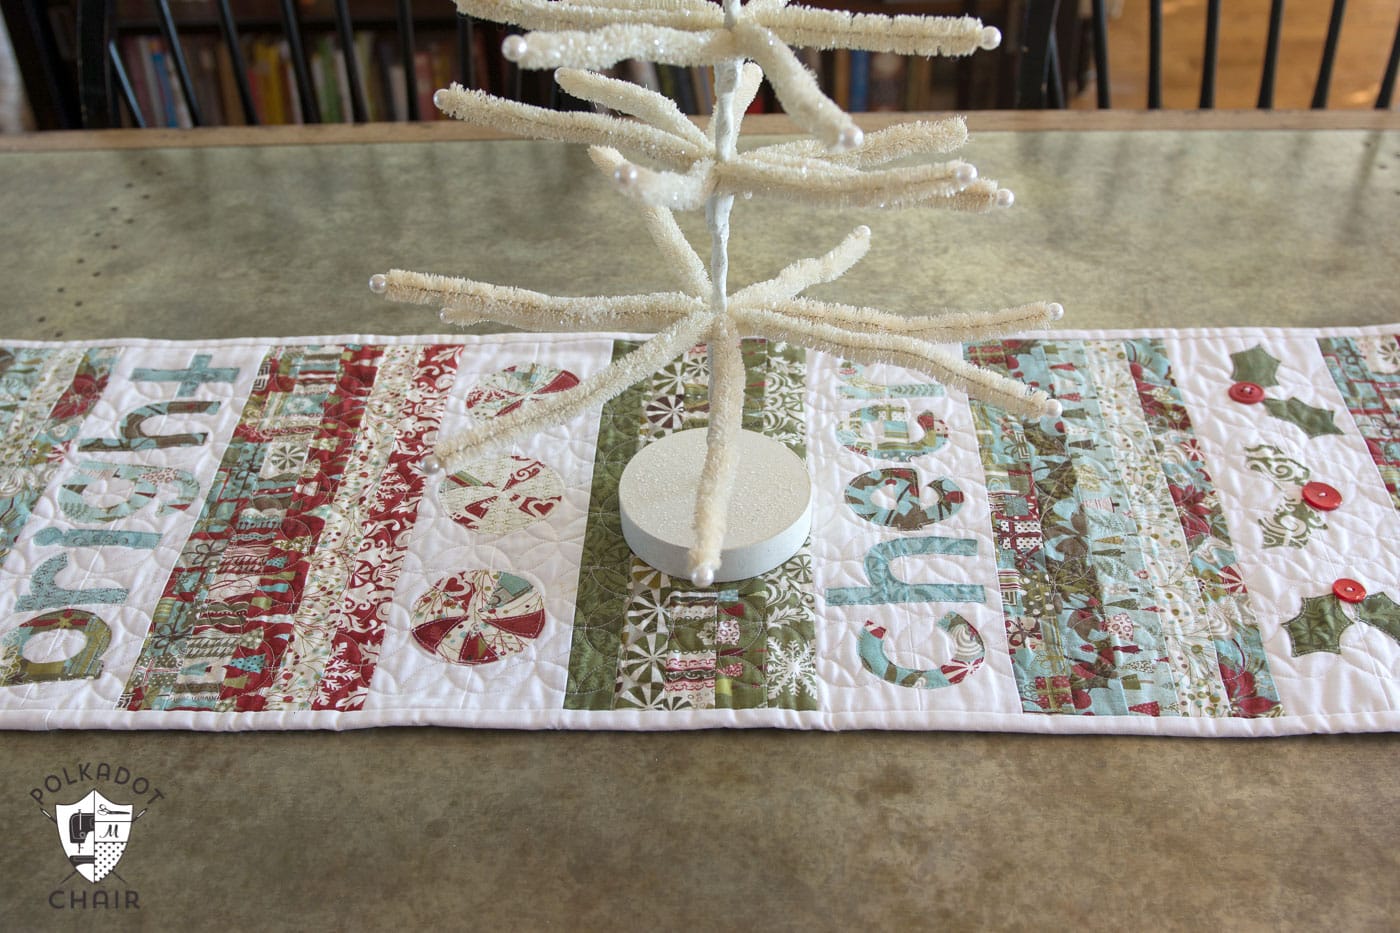 merry and cheer quilted table runner